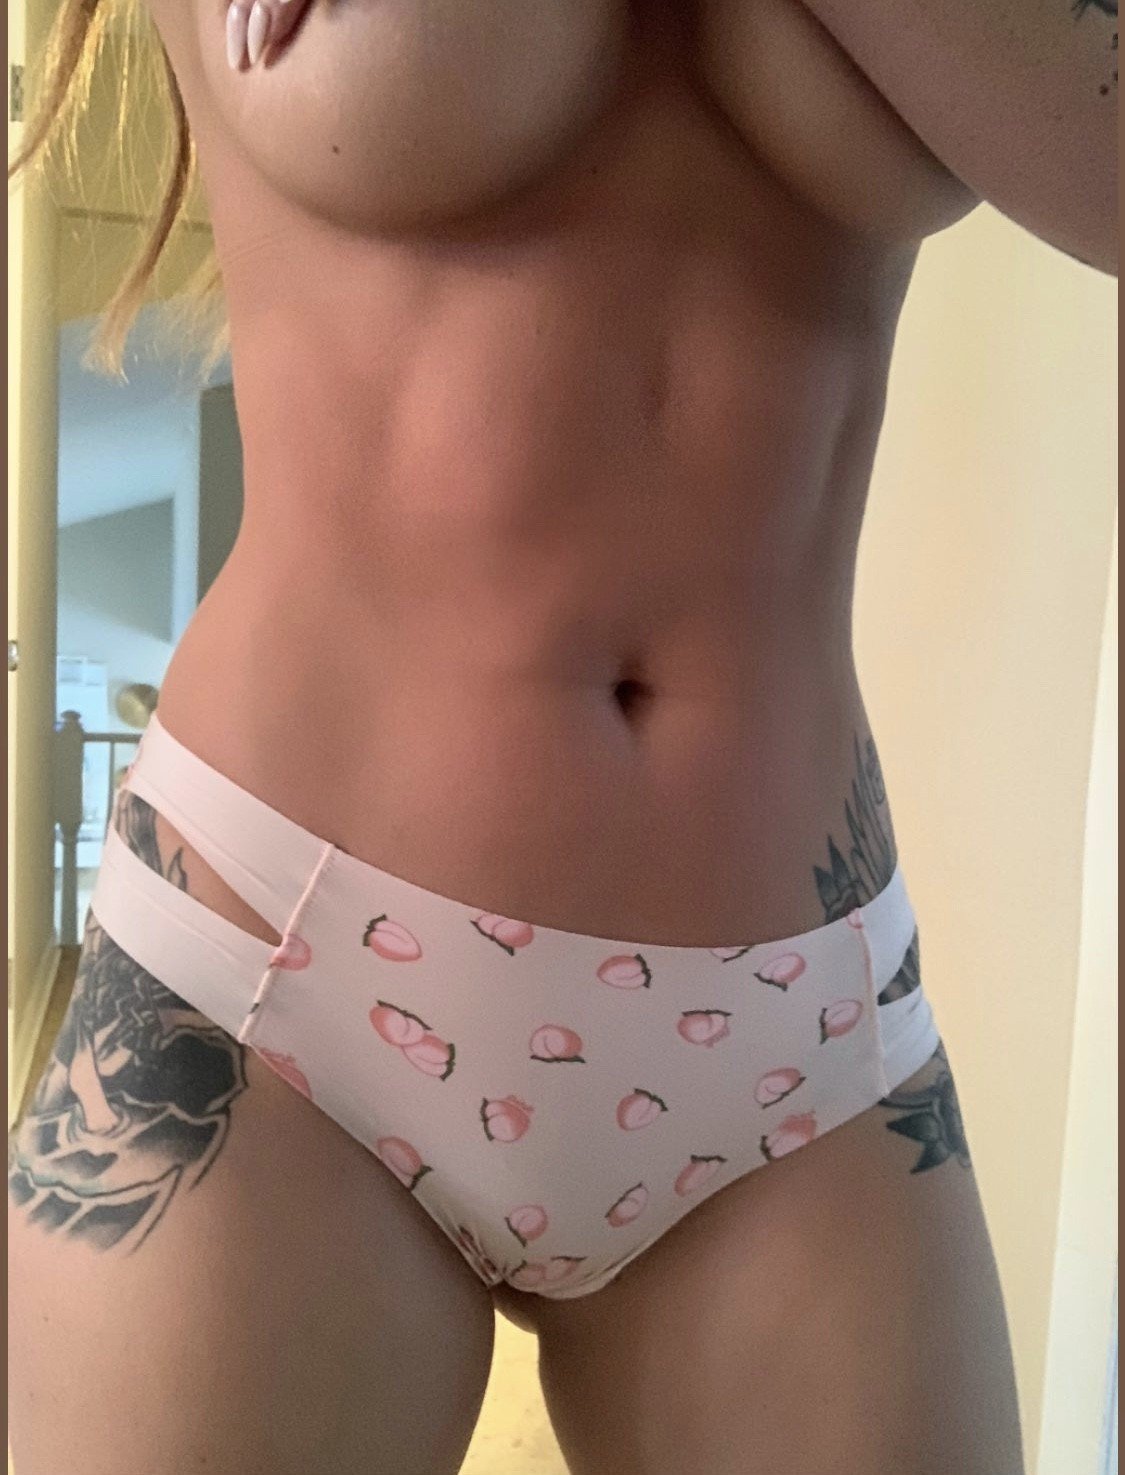 Photo by TrophyWomen with the username @TrophyWomen, who is a verified user,  February 10, 2020 at 3:54 PM. The post is about the topic Amateurs and the text says '🏆 I  get these sent to me this morning with a text that reads, “I’m really glad my abs are finally coming back. What do you think of my before and after pics?” 

If I respond with just, “Abs?” will she get offended thinking I don’t see them or..'